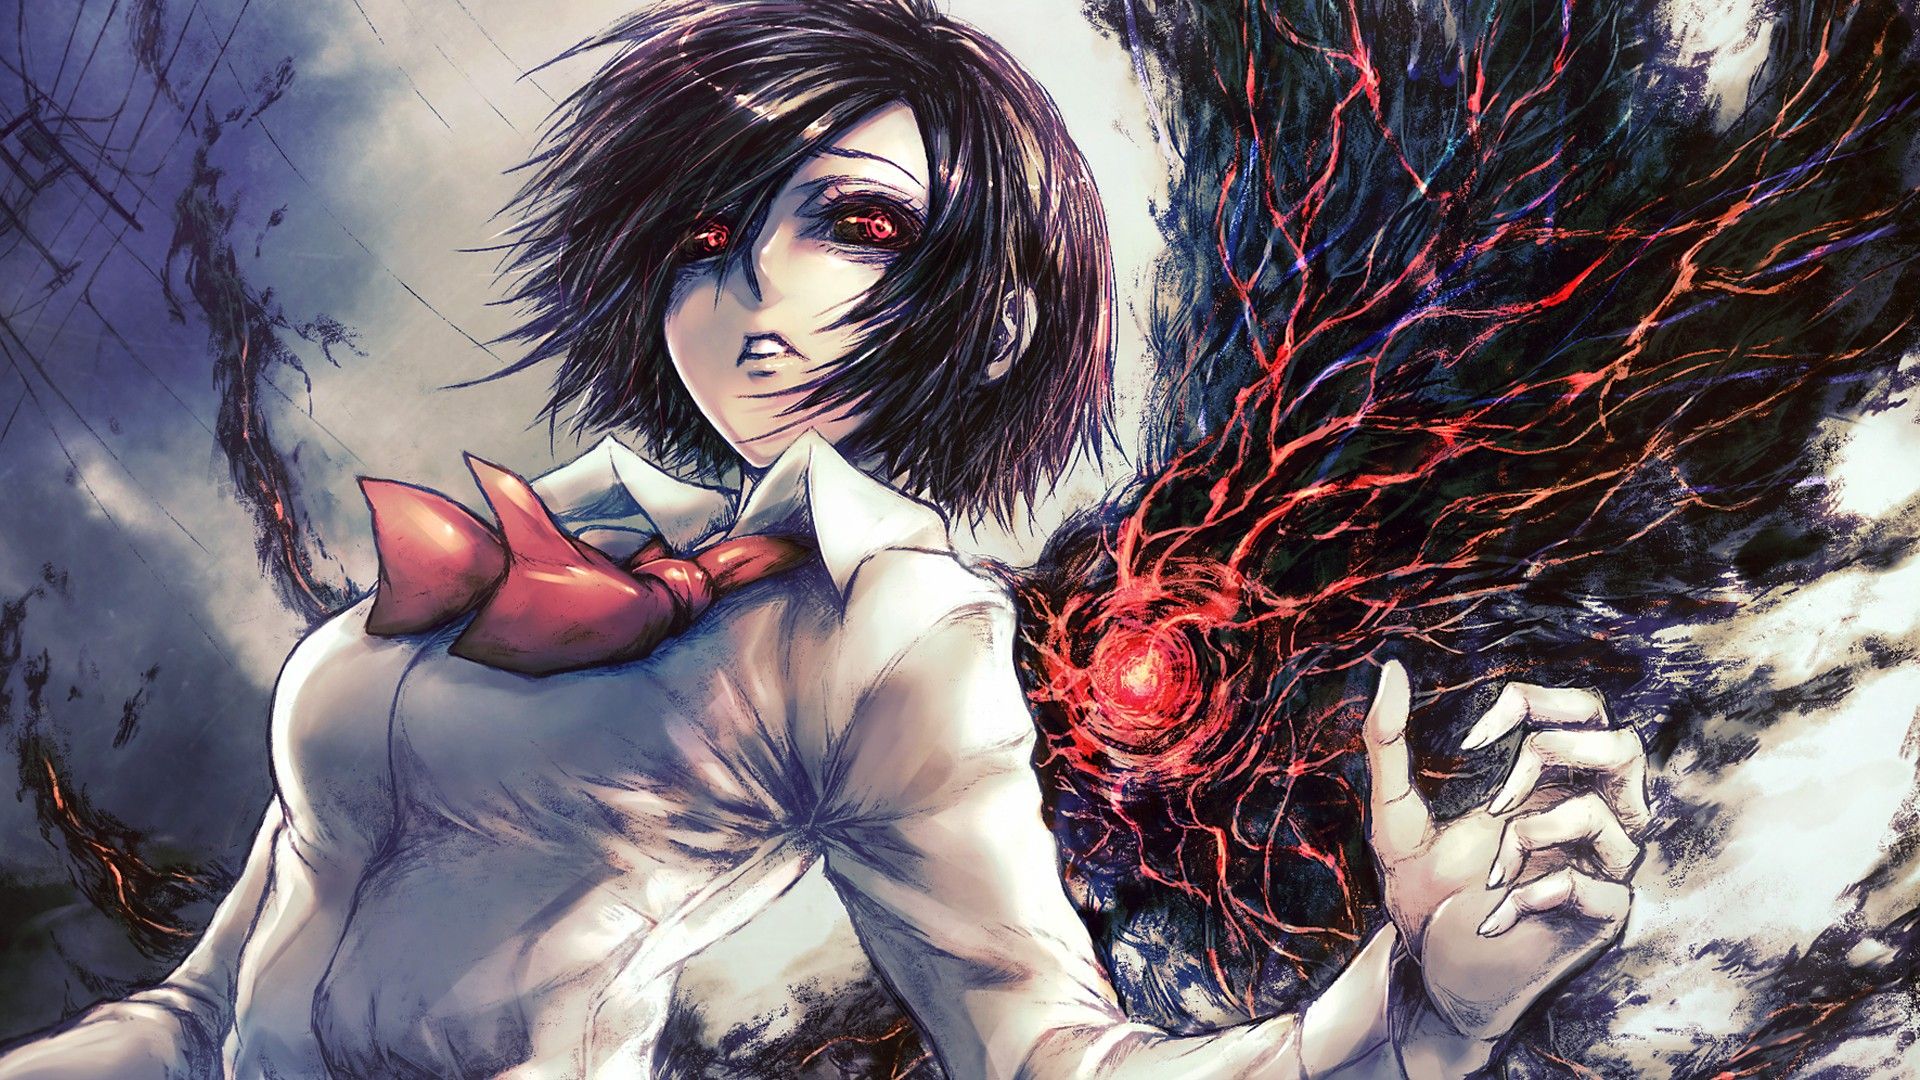 Tokyo Ghoul wallpaper HDDownload free cool background